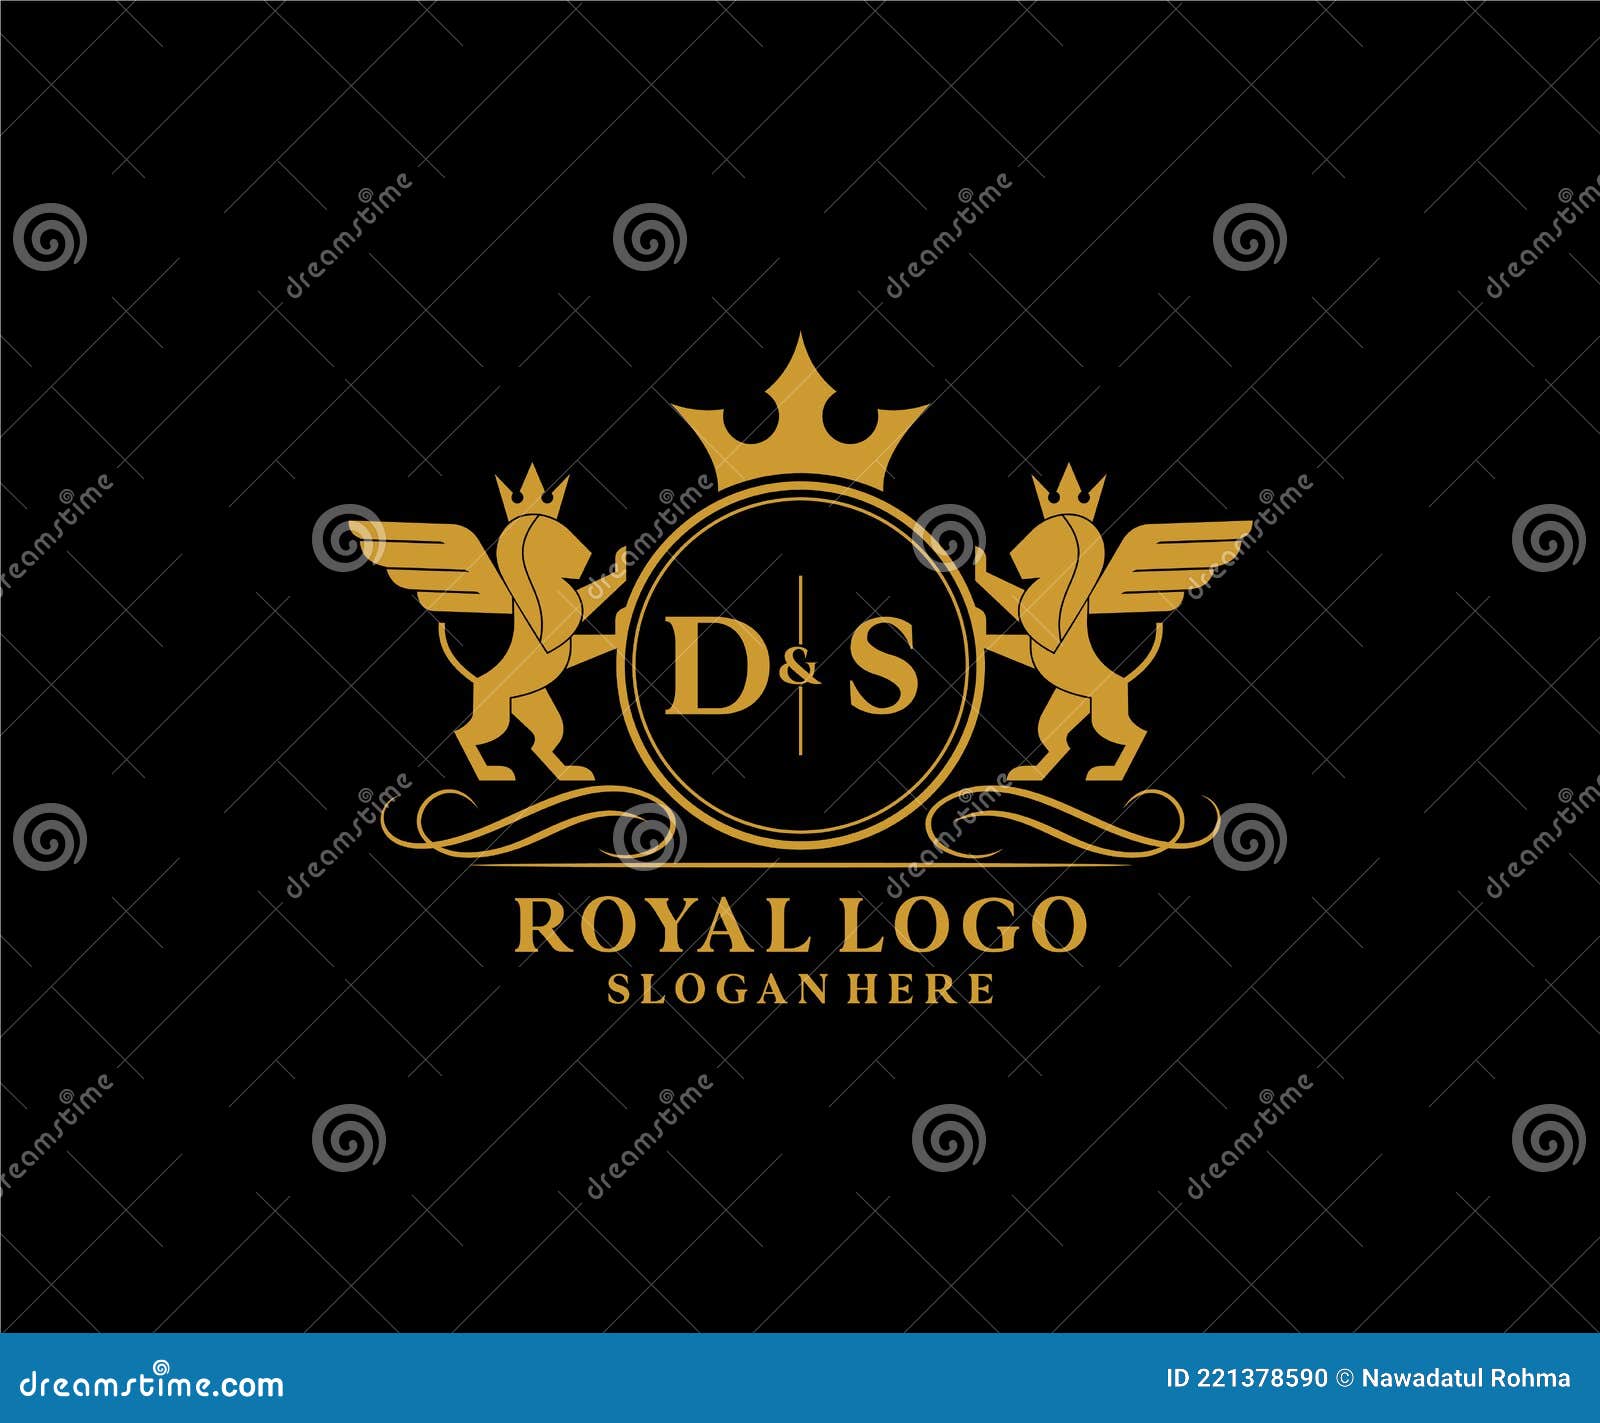 Ds letter initial with royal wing logo template Vector Image